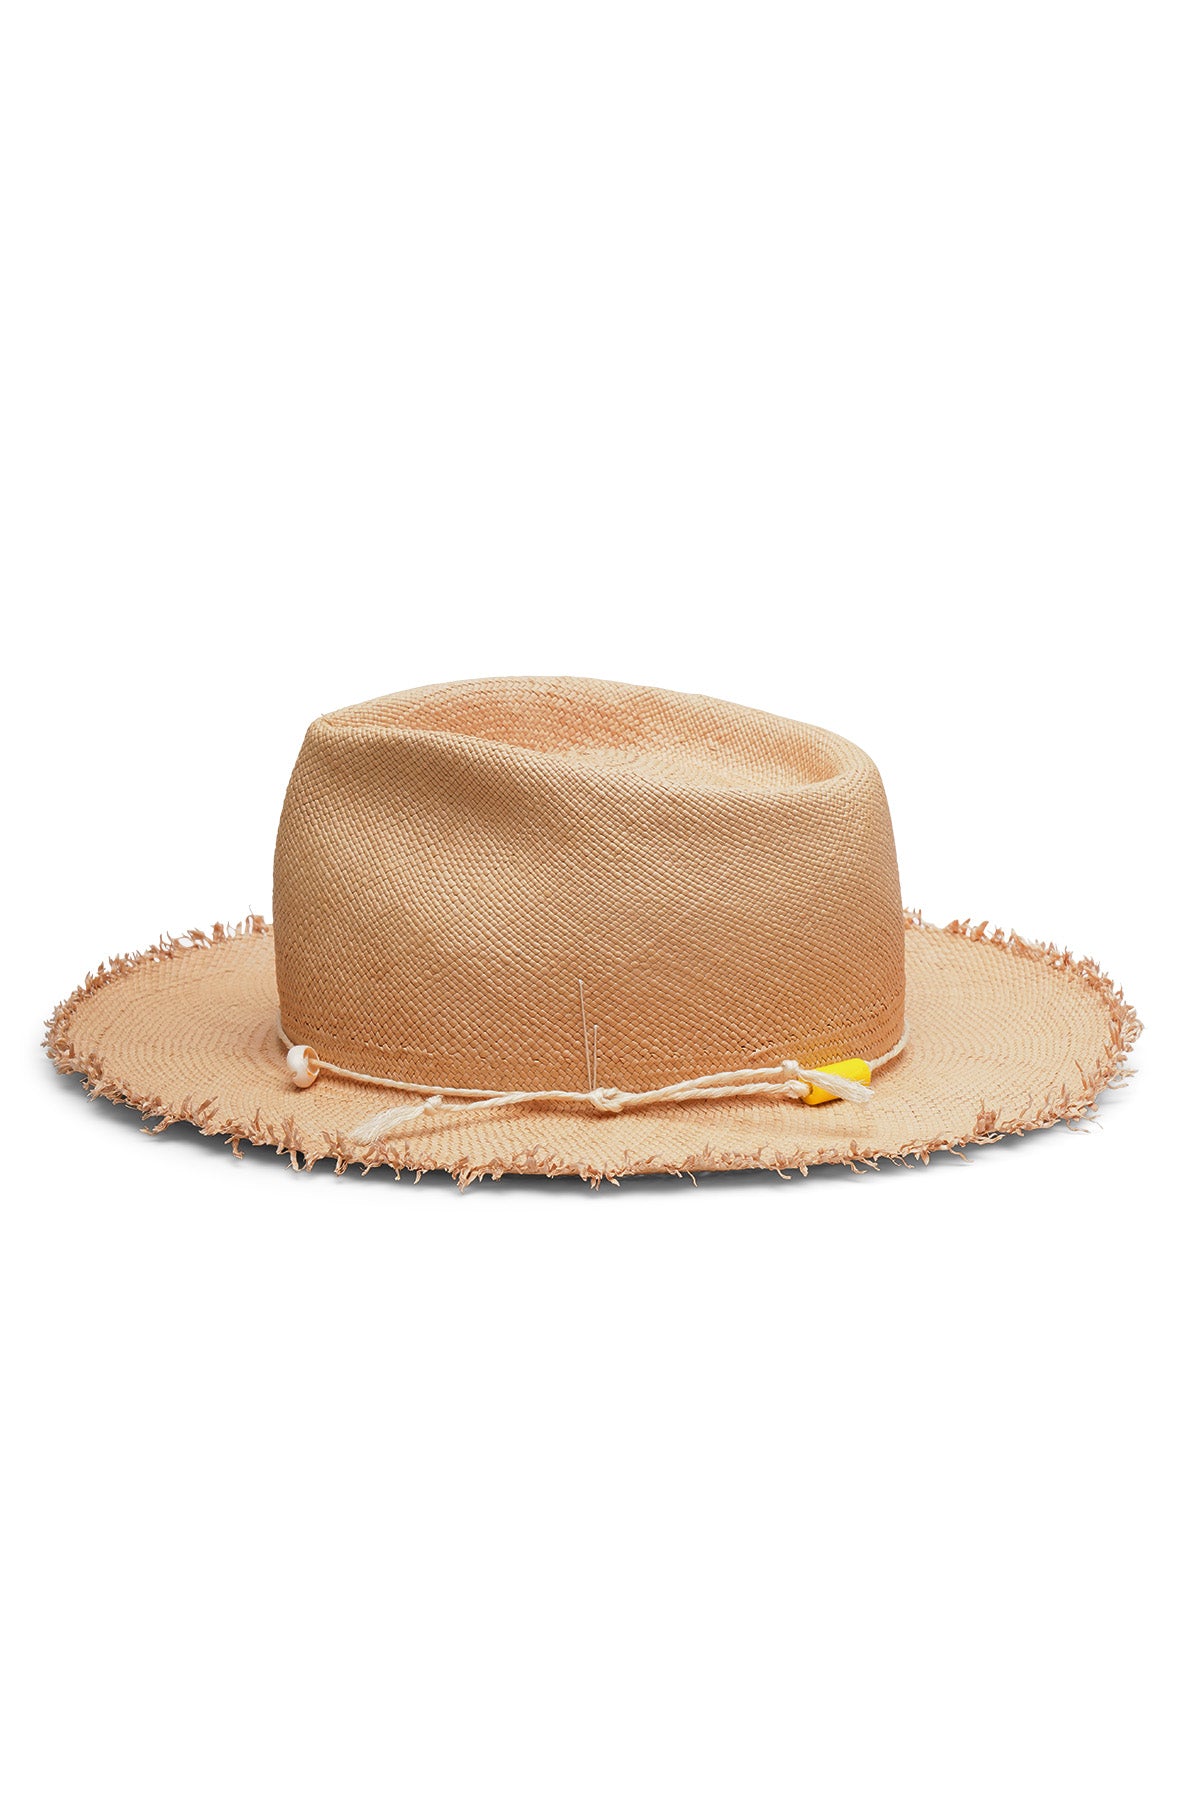 Beige straw fedora style hat with a wide brim, frayed edges and teardrop crease. Tied rope with beads and seashell detail. Unisex hat style in various sizes and colors. We ship worldwide. Shop now. Each SoonNoon hat is handmade with unique character in Stockholm, Sweden. 